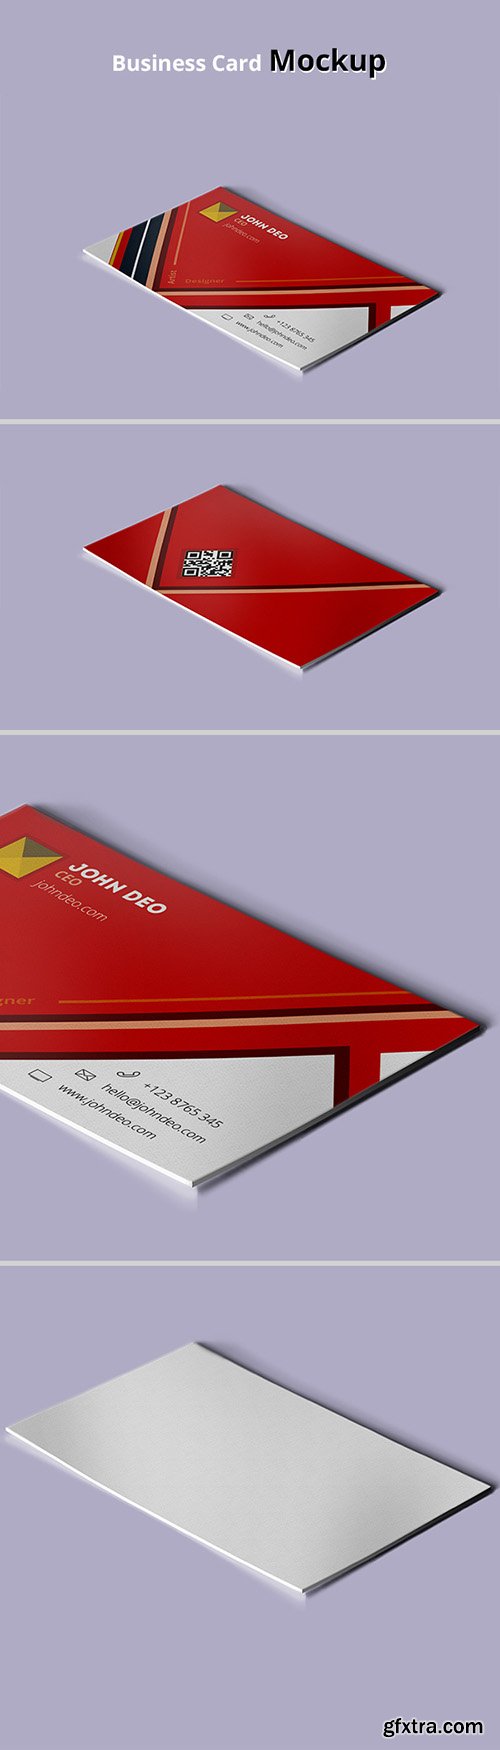 PSD Mock-Up - Red Business Card Vol.1